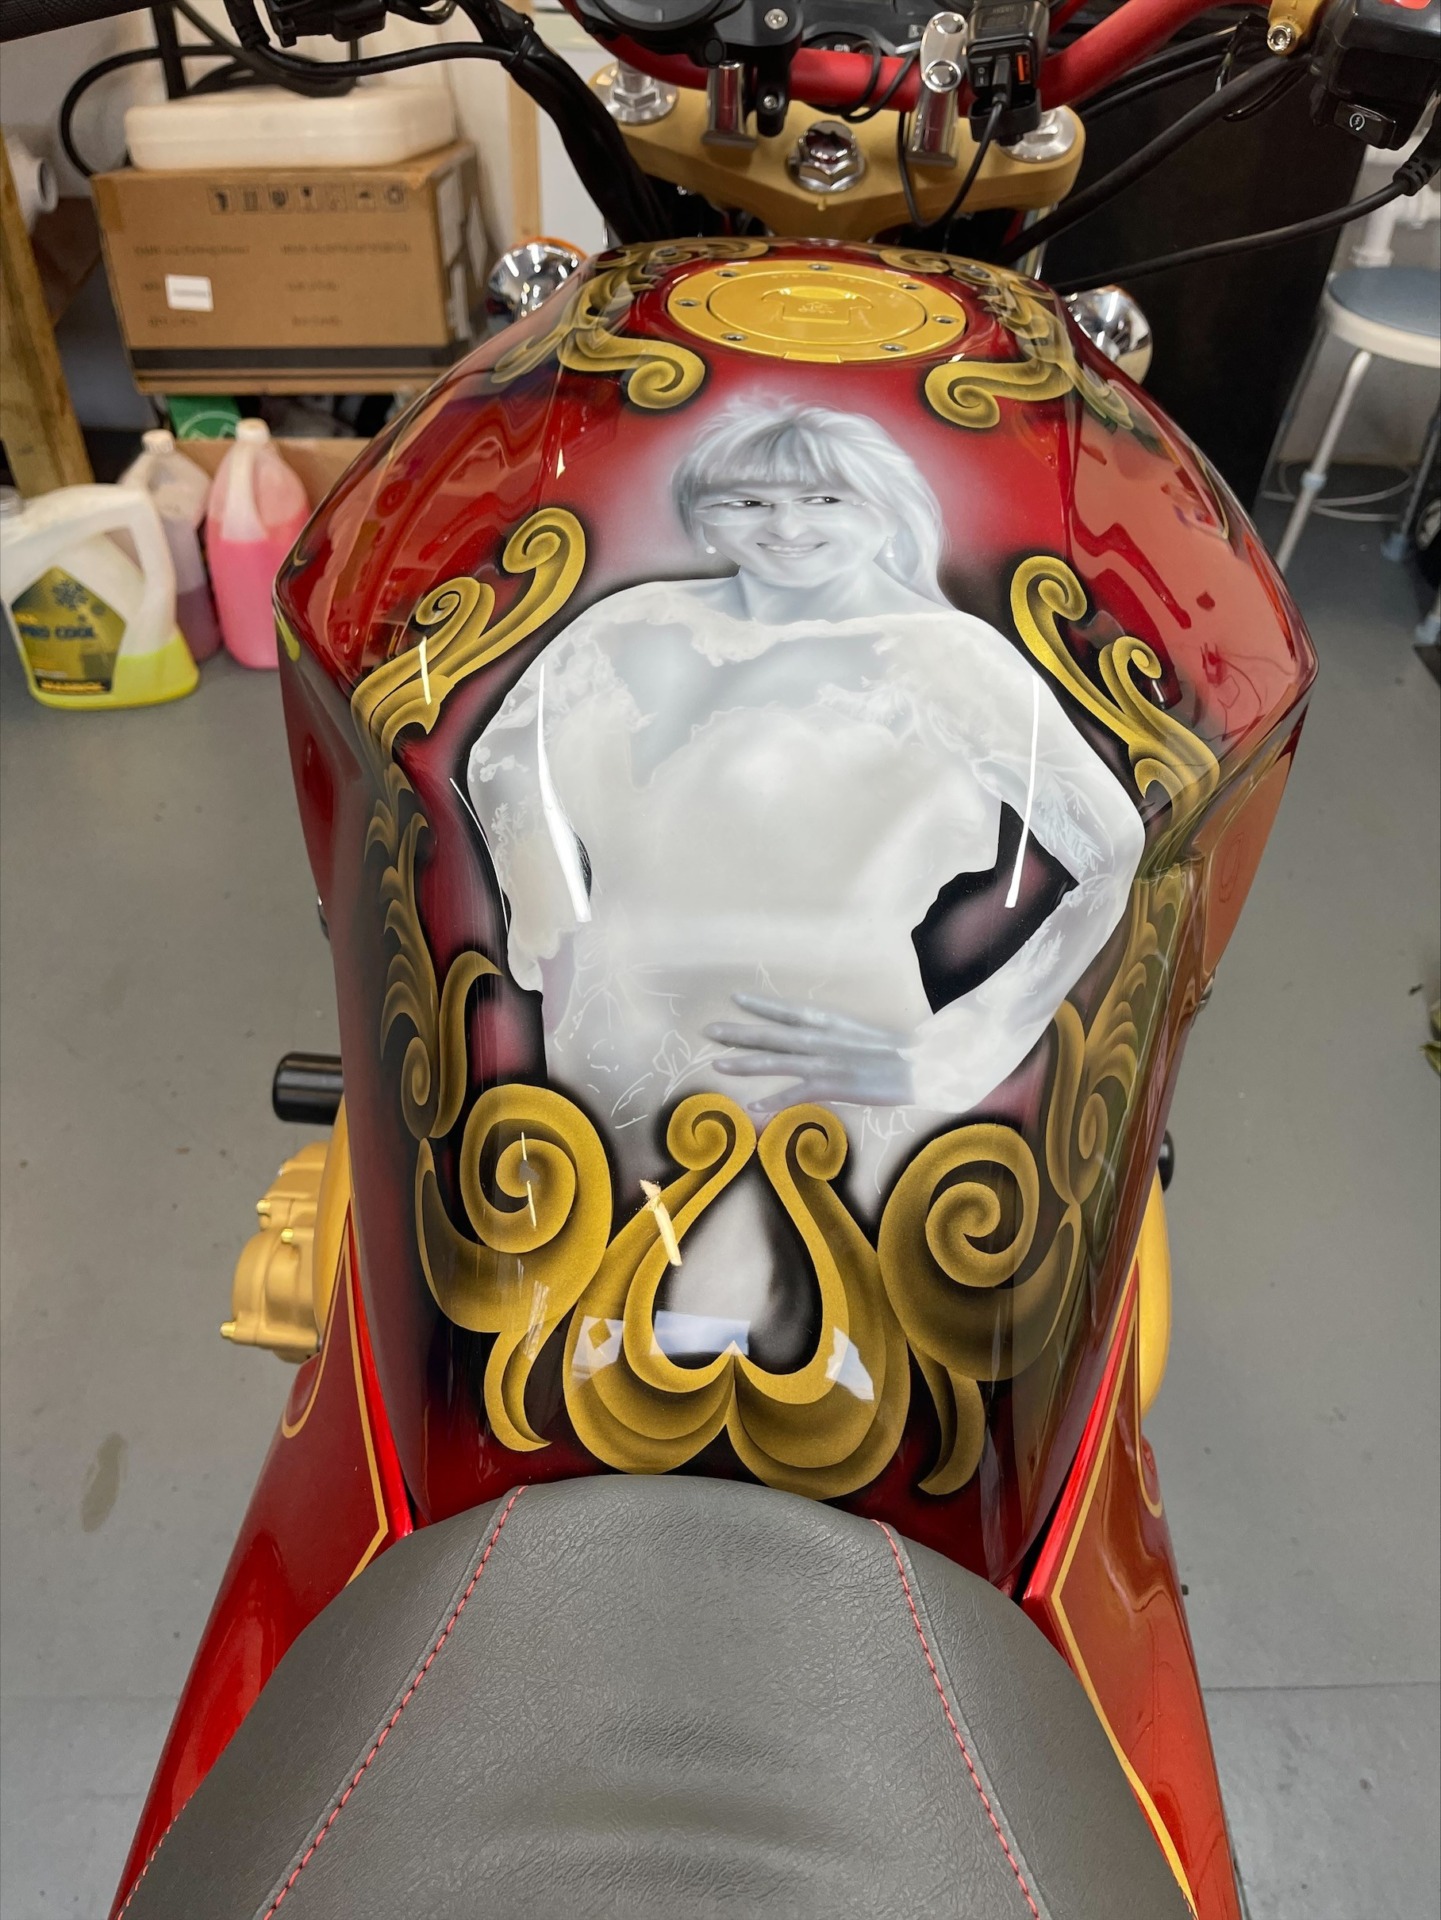 A black and white painting of Janet Kirk, featured on a red and gold motorbike.